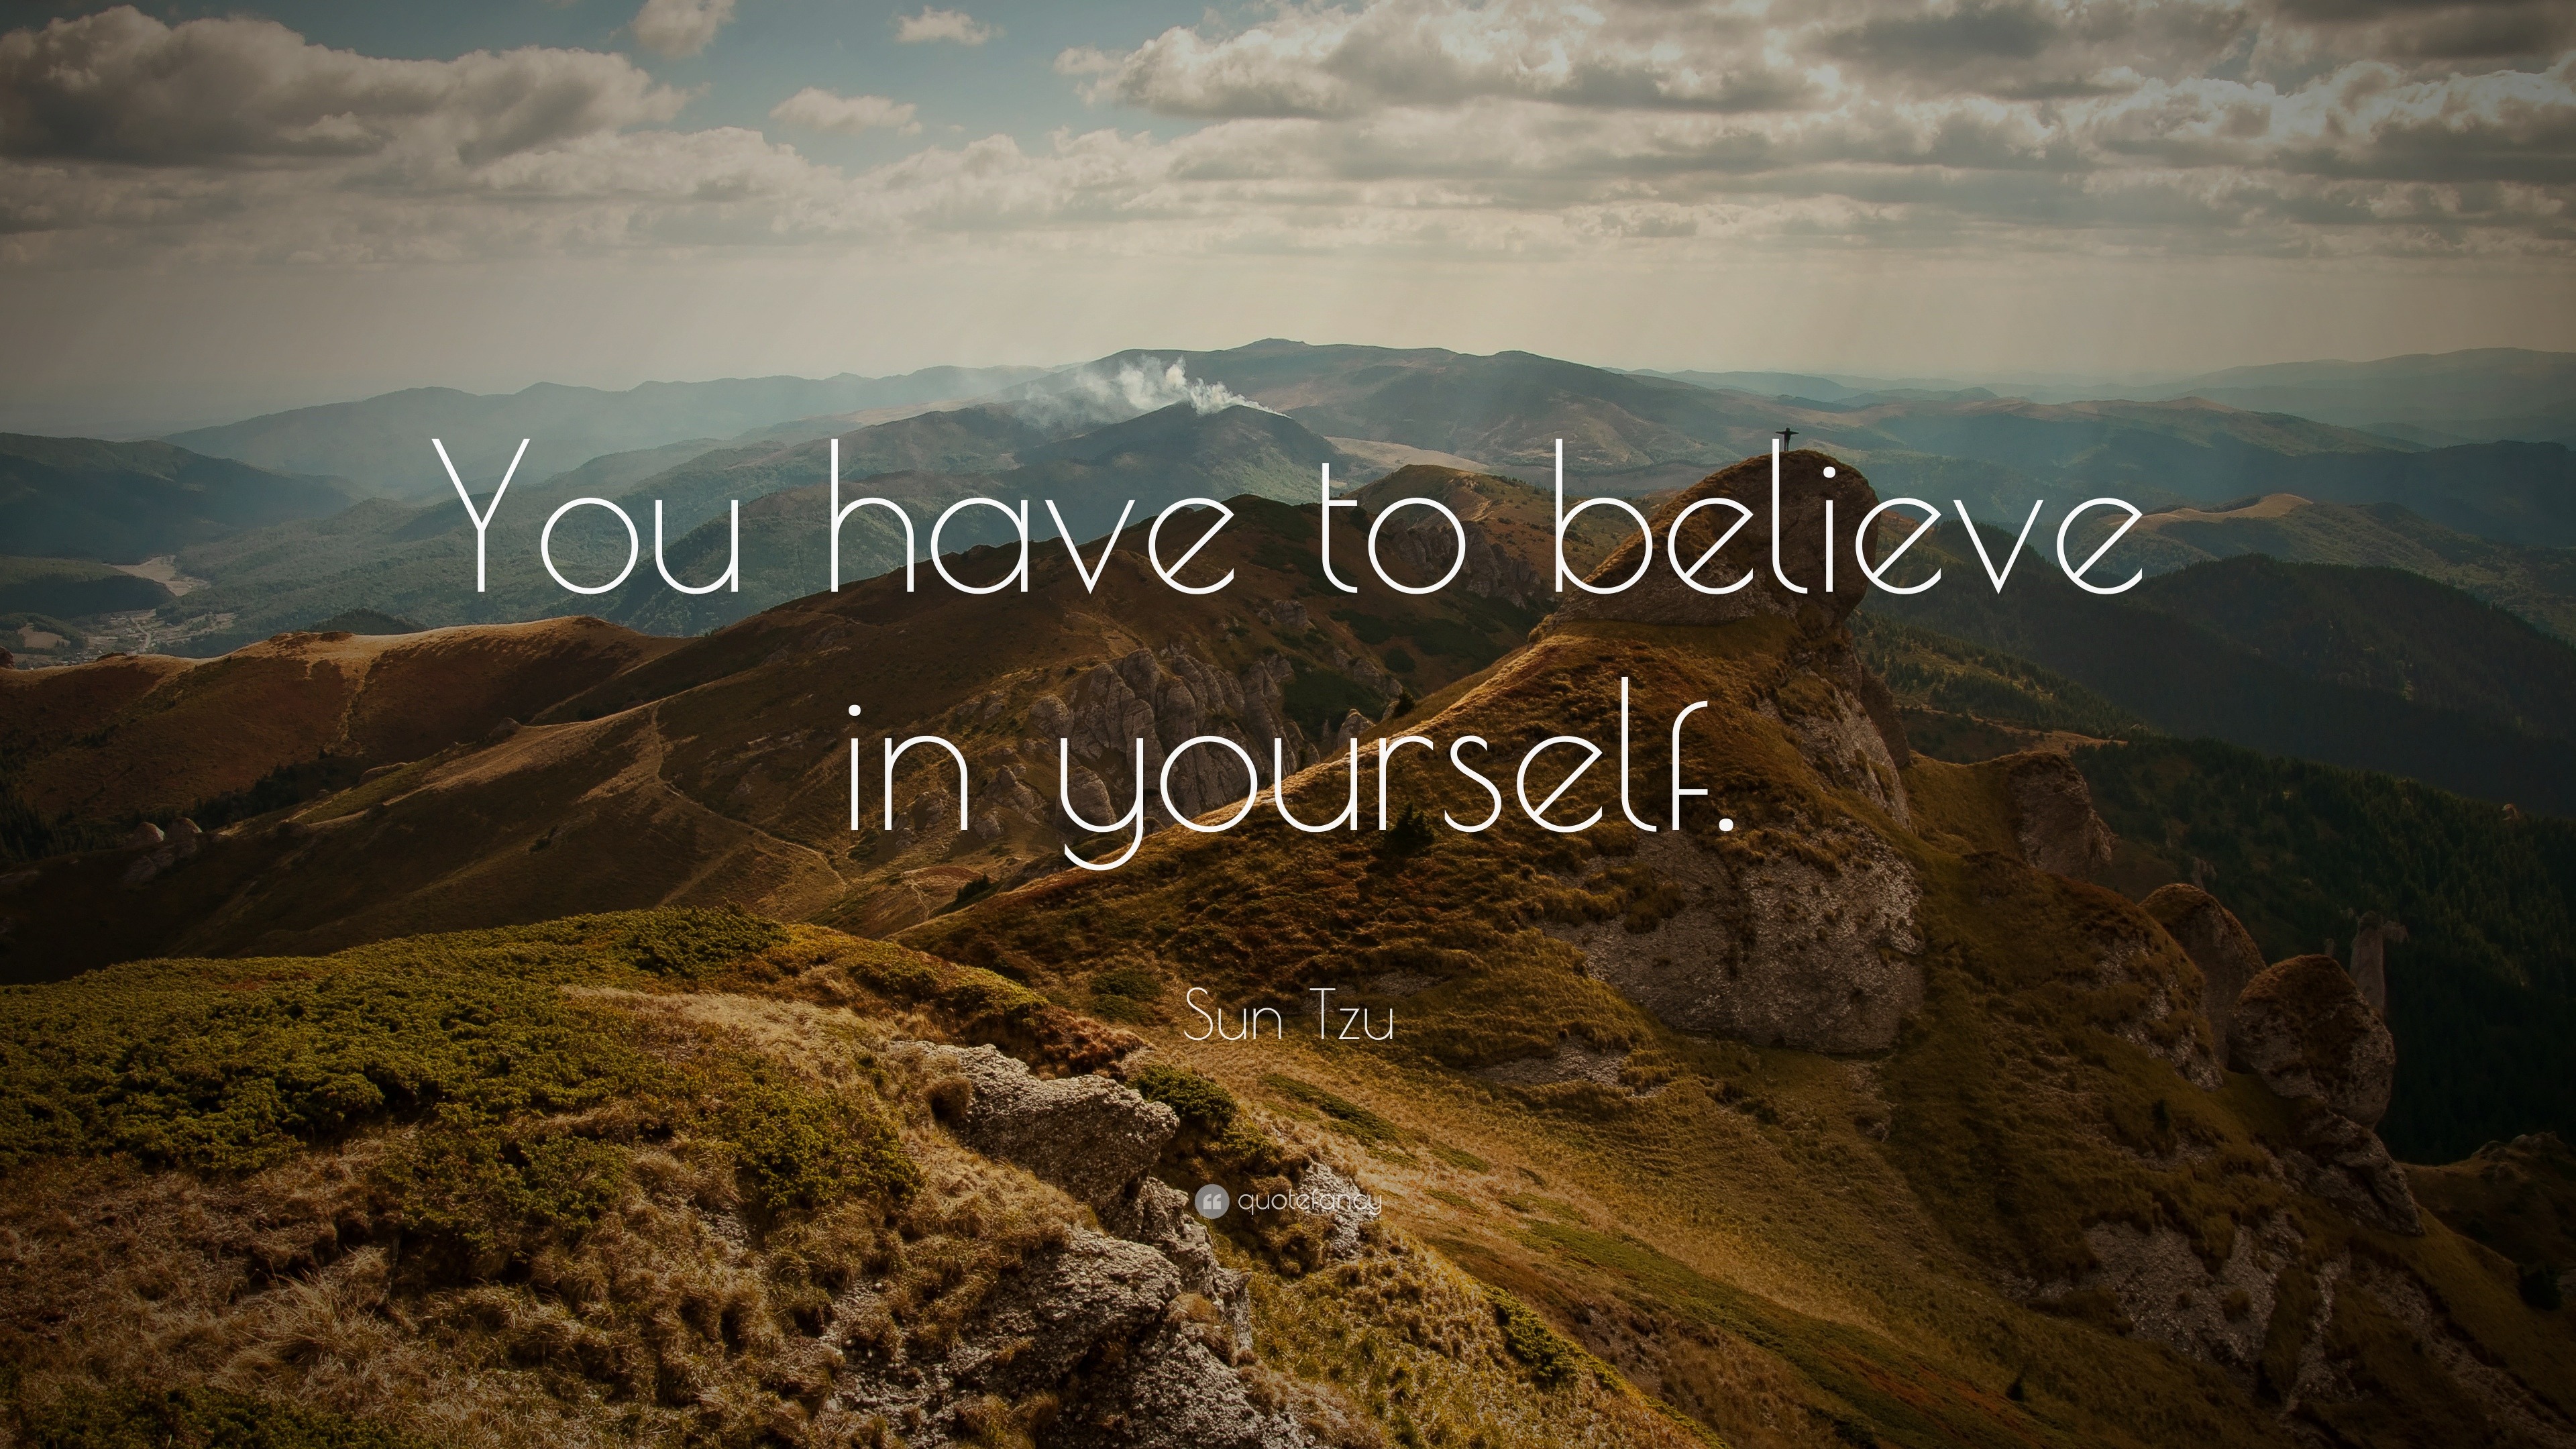 Sun Tzu Quote: “You have to believe in yourself. ”